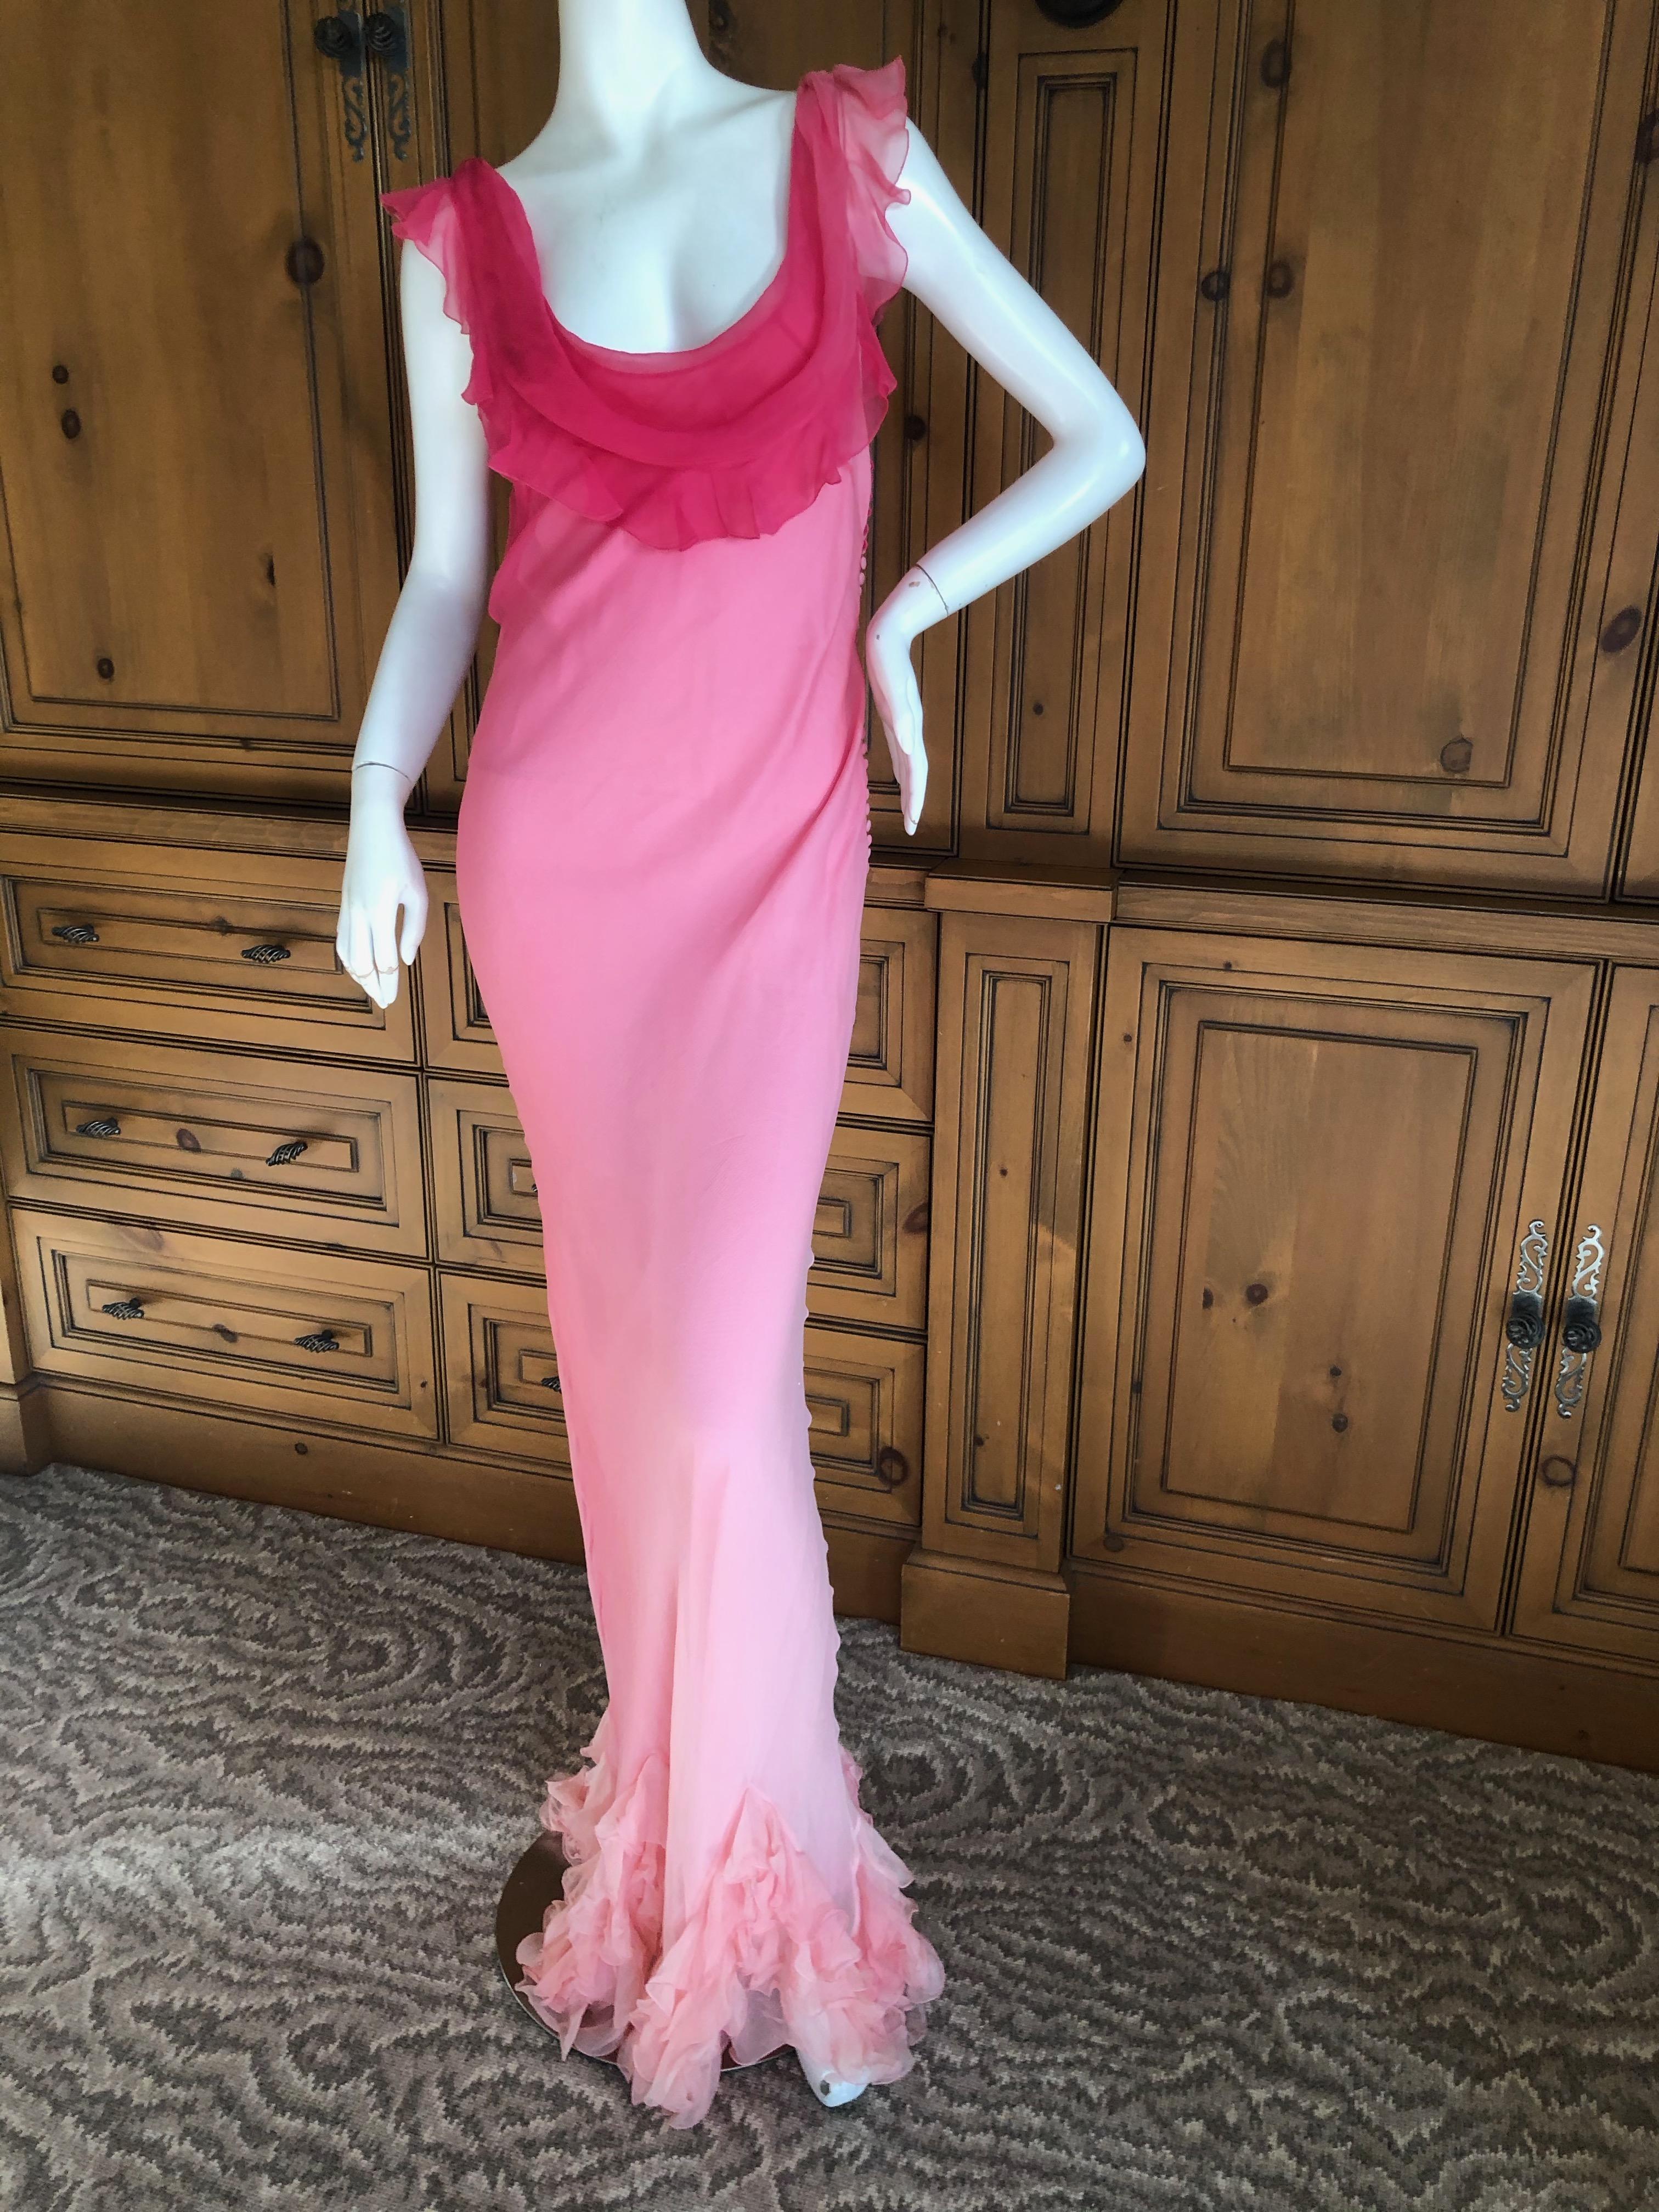 Christian Dior by John Galliano Bias Cut Ombre Silk Evening Dress w Ruffled Hem In Excellent Condition For Sale In Cloverdale, CA